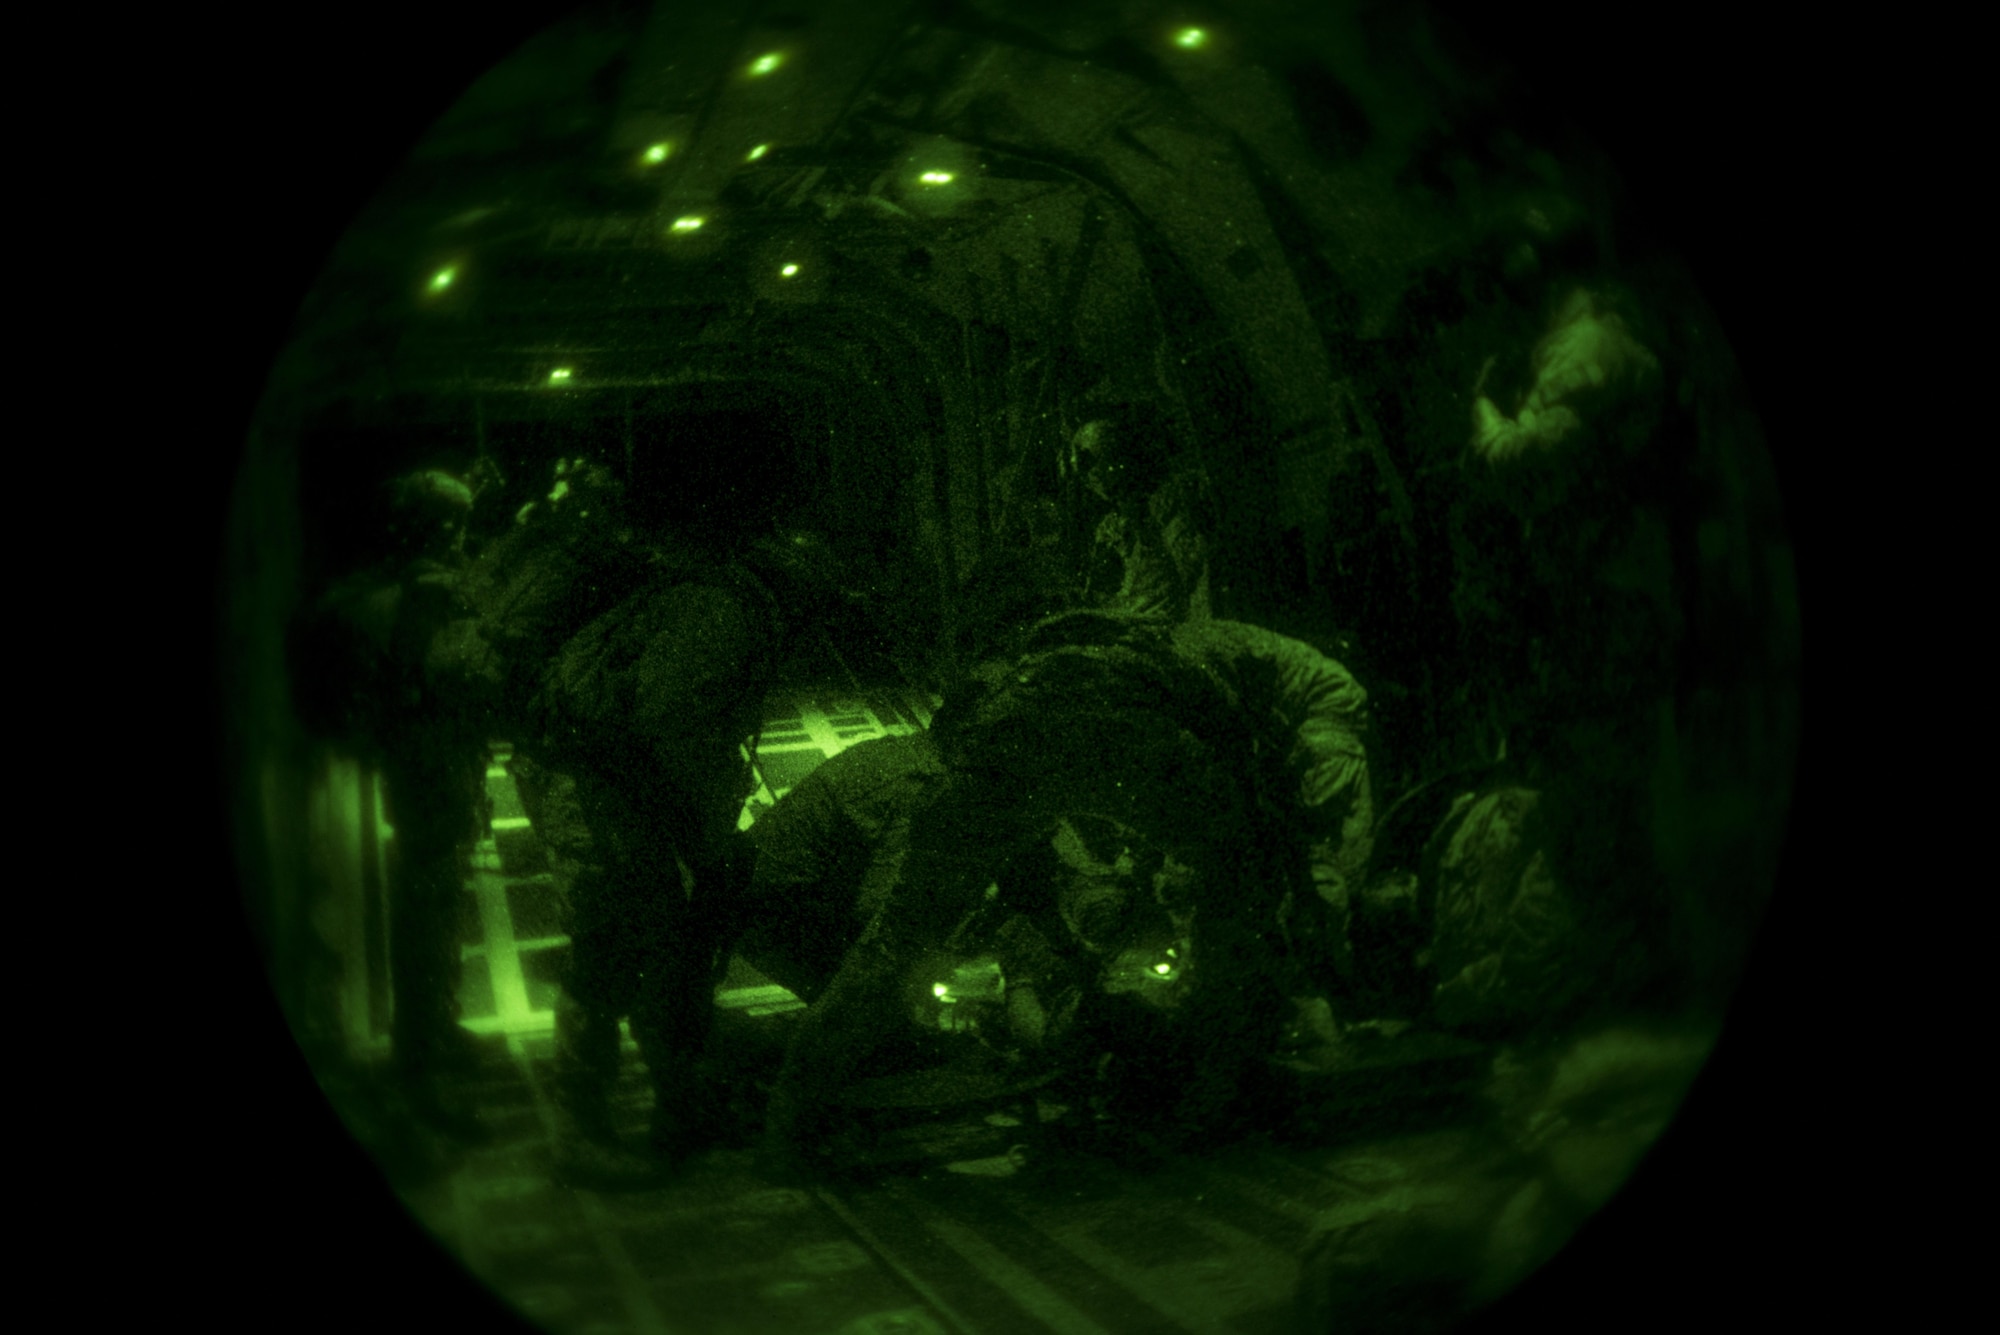 U.S. and Spanish air commandos work together to give care to a patient with a simulated gunshot wound on an MC-130J Commando II from the 352d Special Operations Wing during TRIDENT JUNCTURE, Nov. 2, 2015. The exercise involved U.S. and Spanish air commandos completing a rapid exfiltration from a remote airfield under simulated fire. (U.S. Air Force photo by 1st Lt. Chris Sullivan/Released)